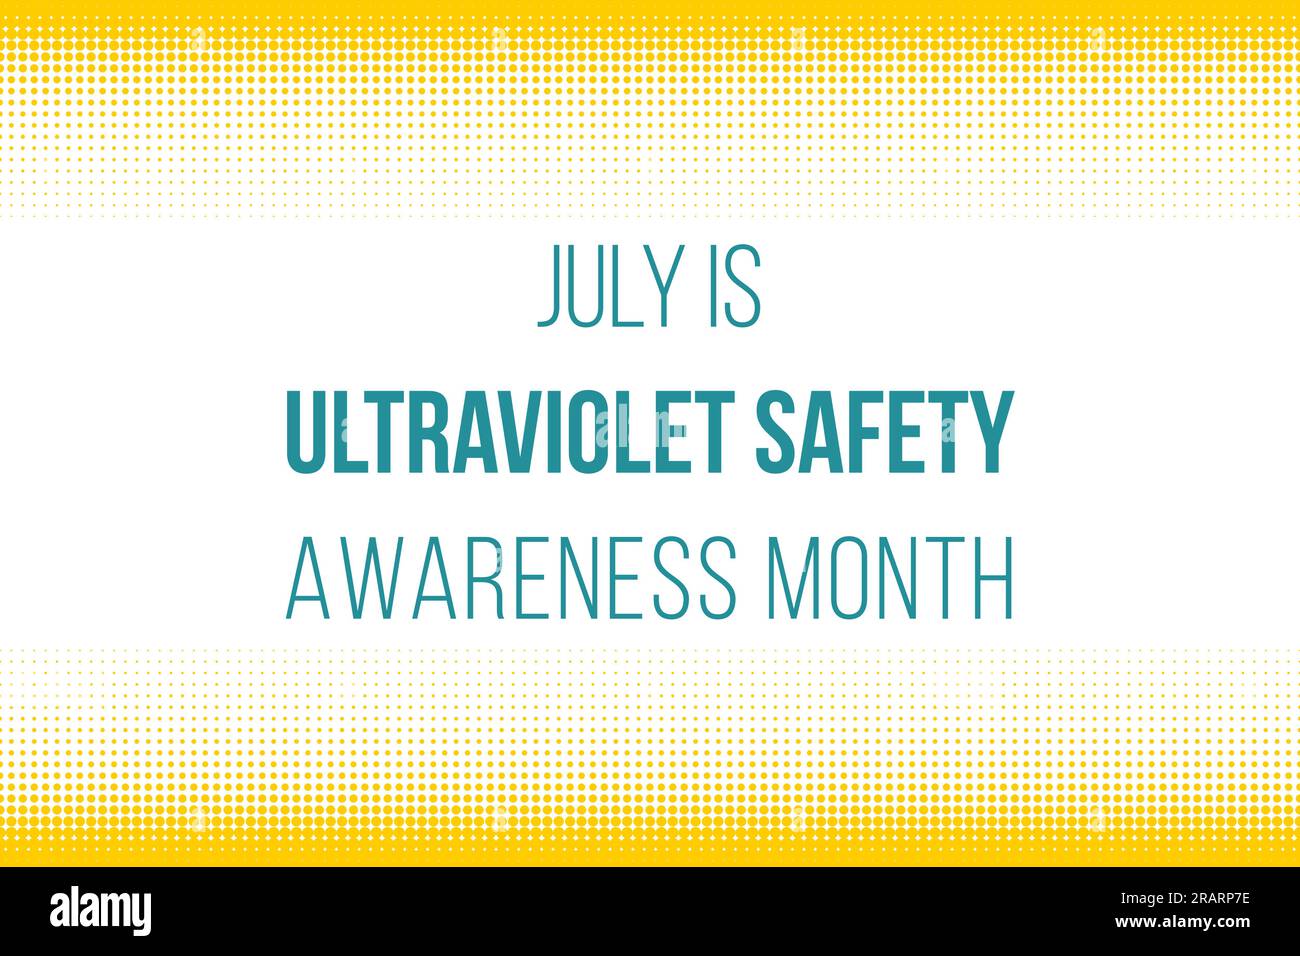 Social media announcement poster for Ultraviolet Safety Awareness Month ...